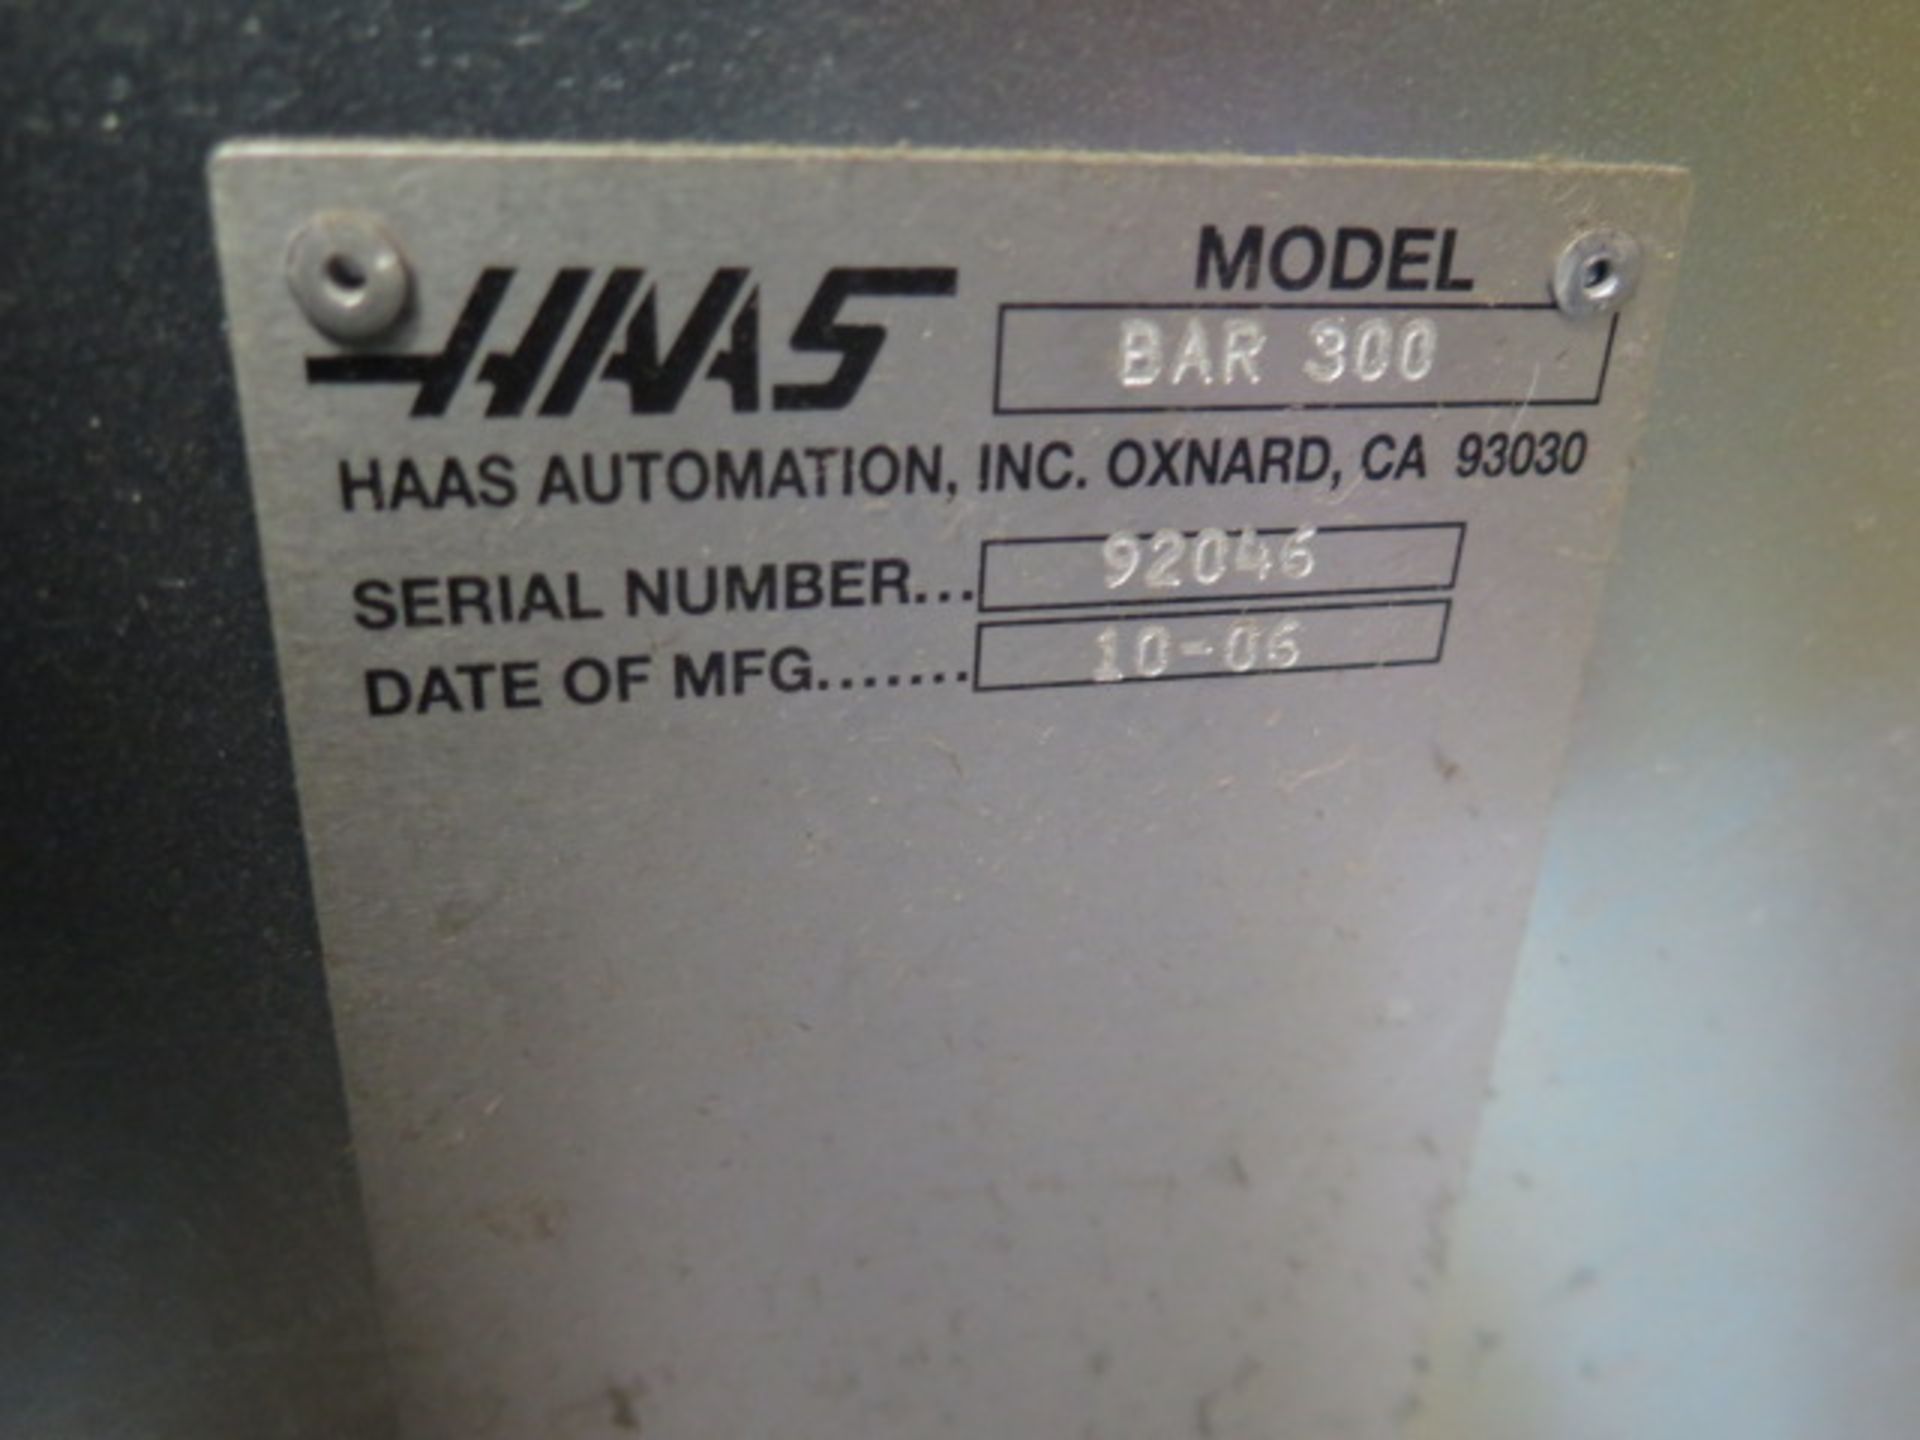 Haas Servobar 300 Automatic Bar Loader / Feeder s/n 92046 w/ Spindle Liner Set (SOLD AS-IS - NO WARR - Image 11 of 11